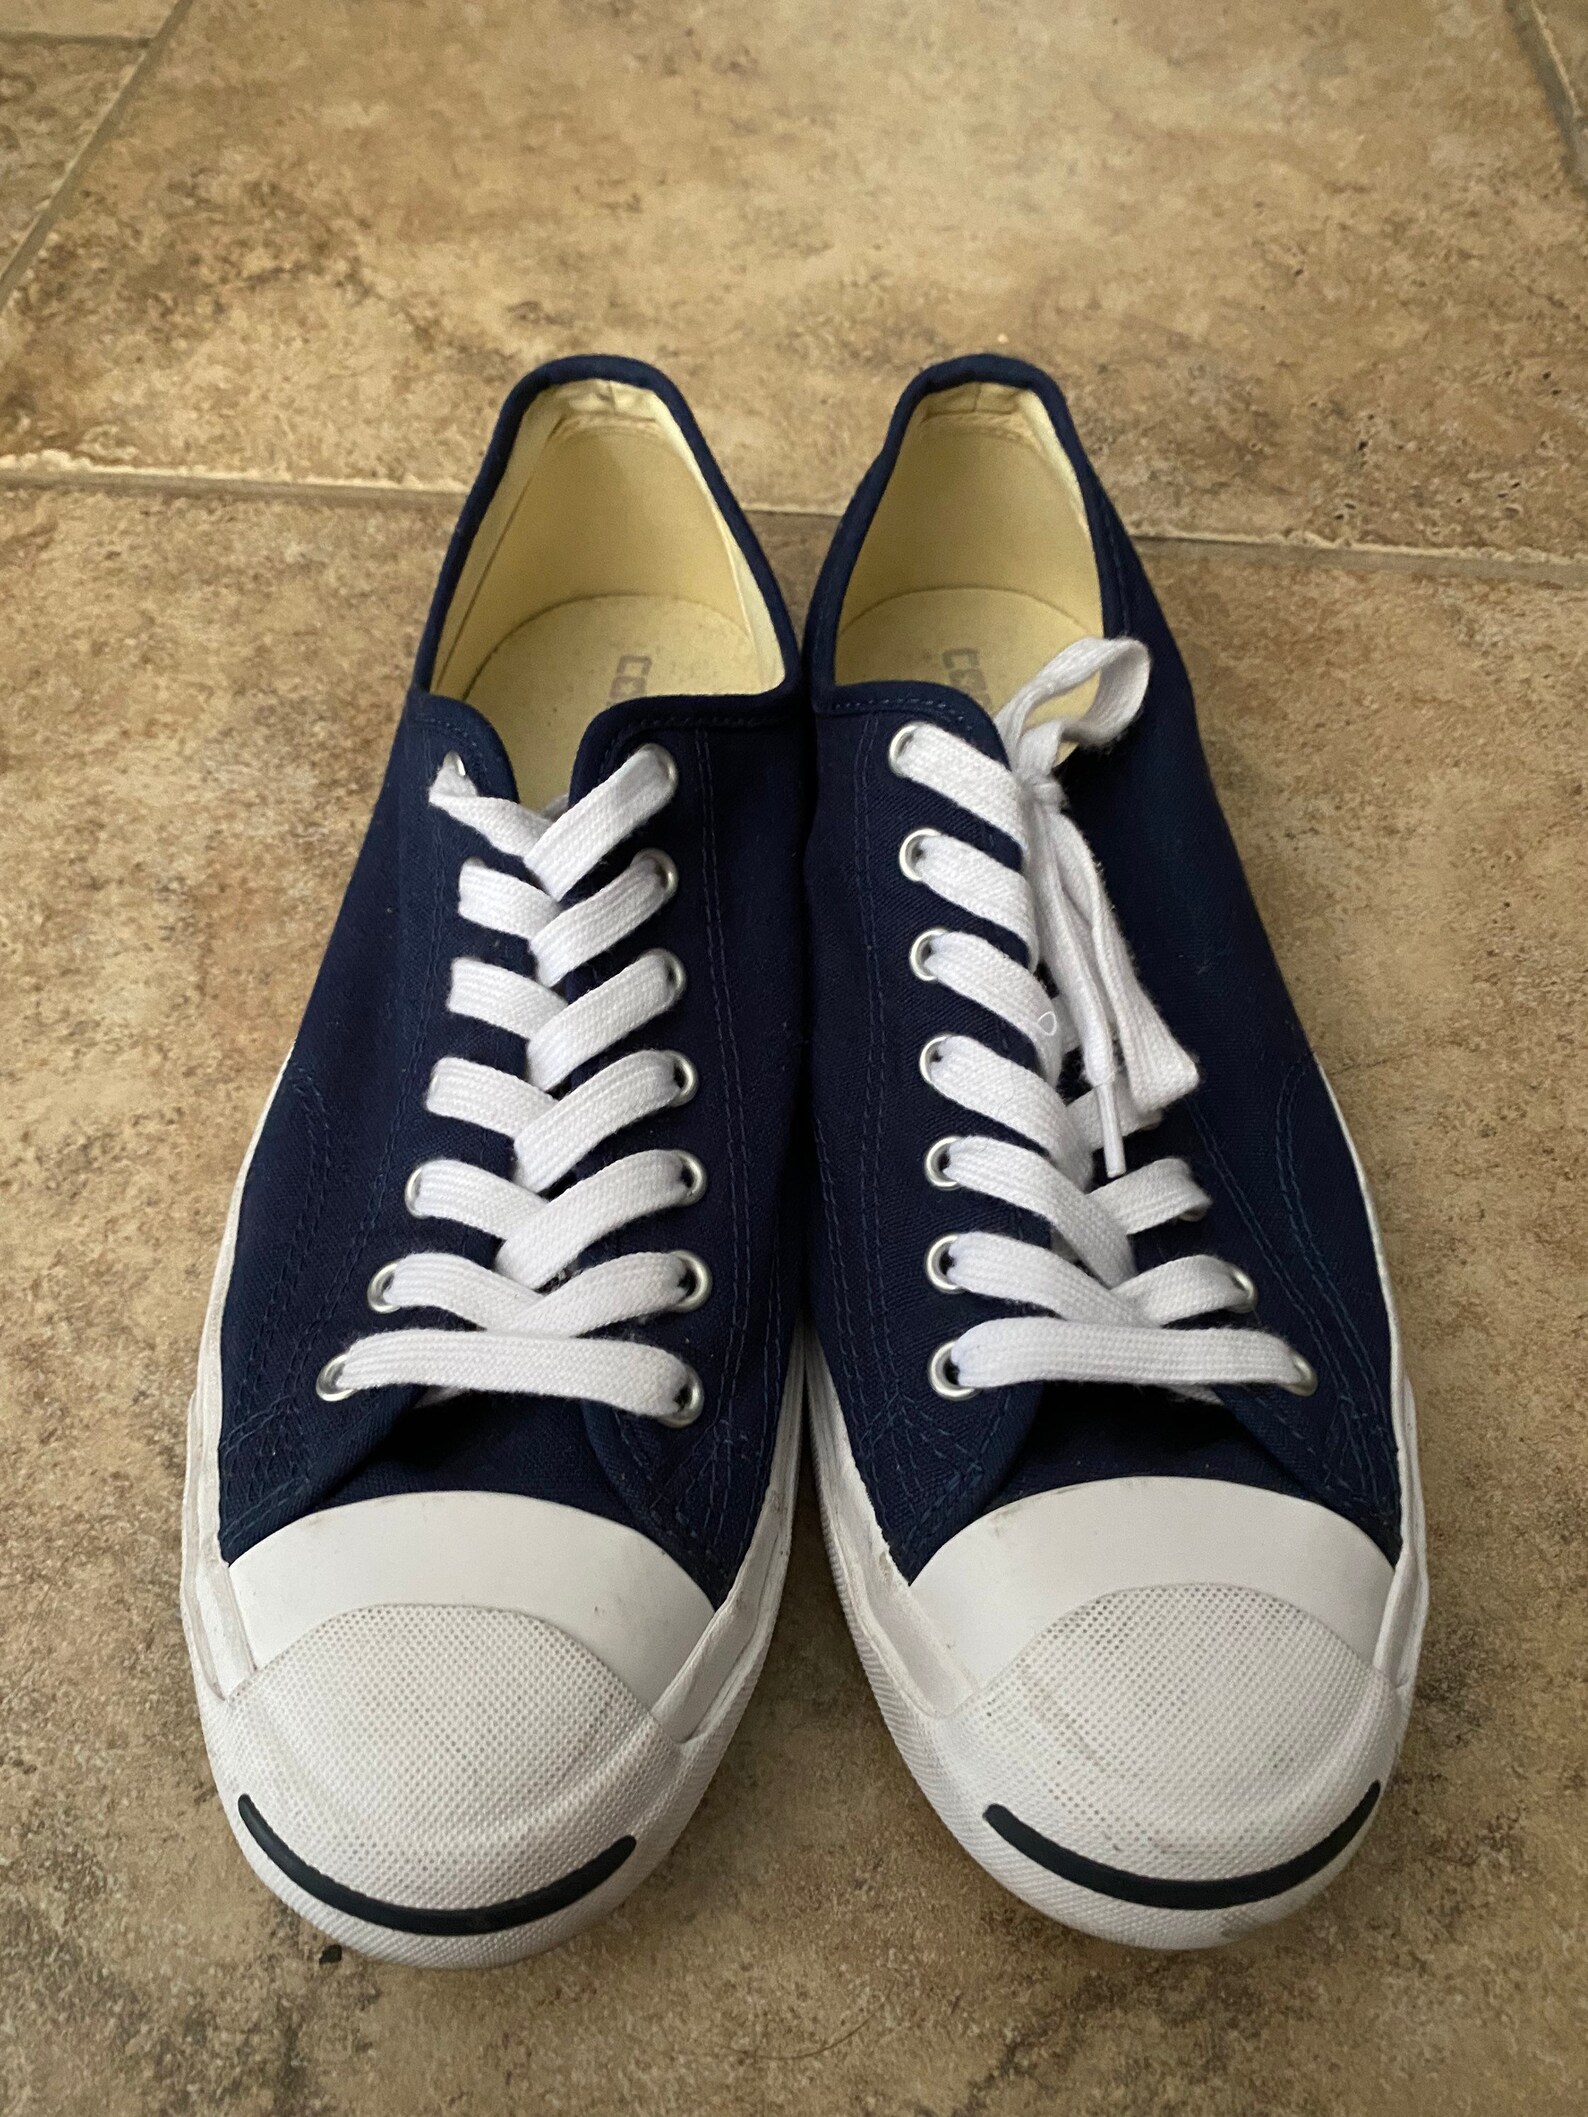 Converse Men's Jack Purcell Pro Suede Low Top Navy Blue | Etsy